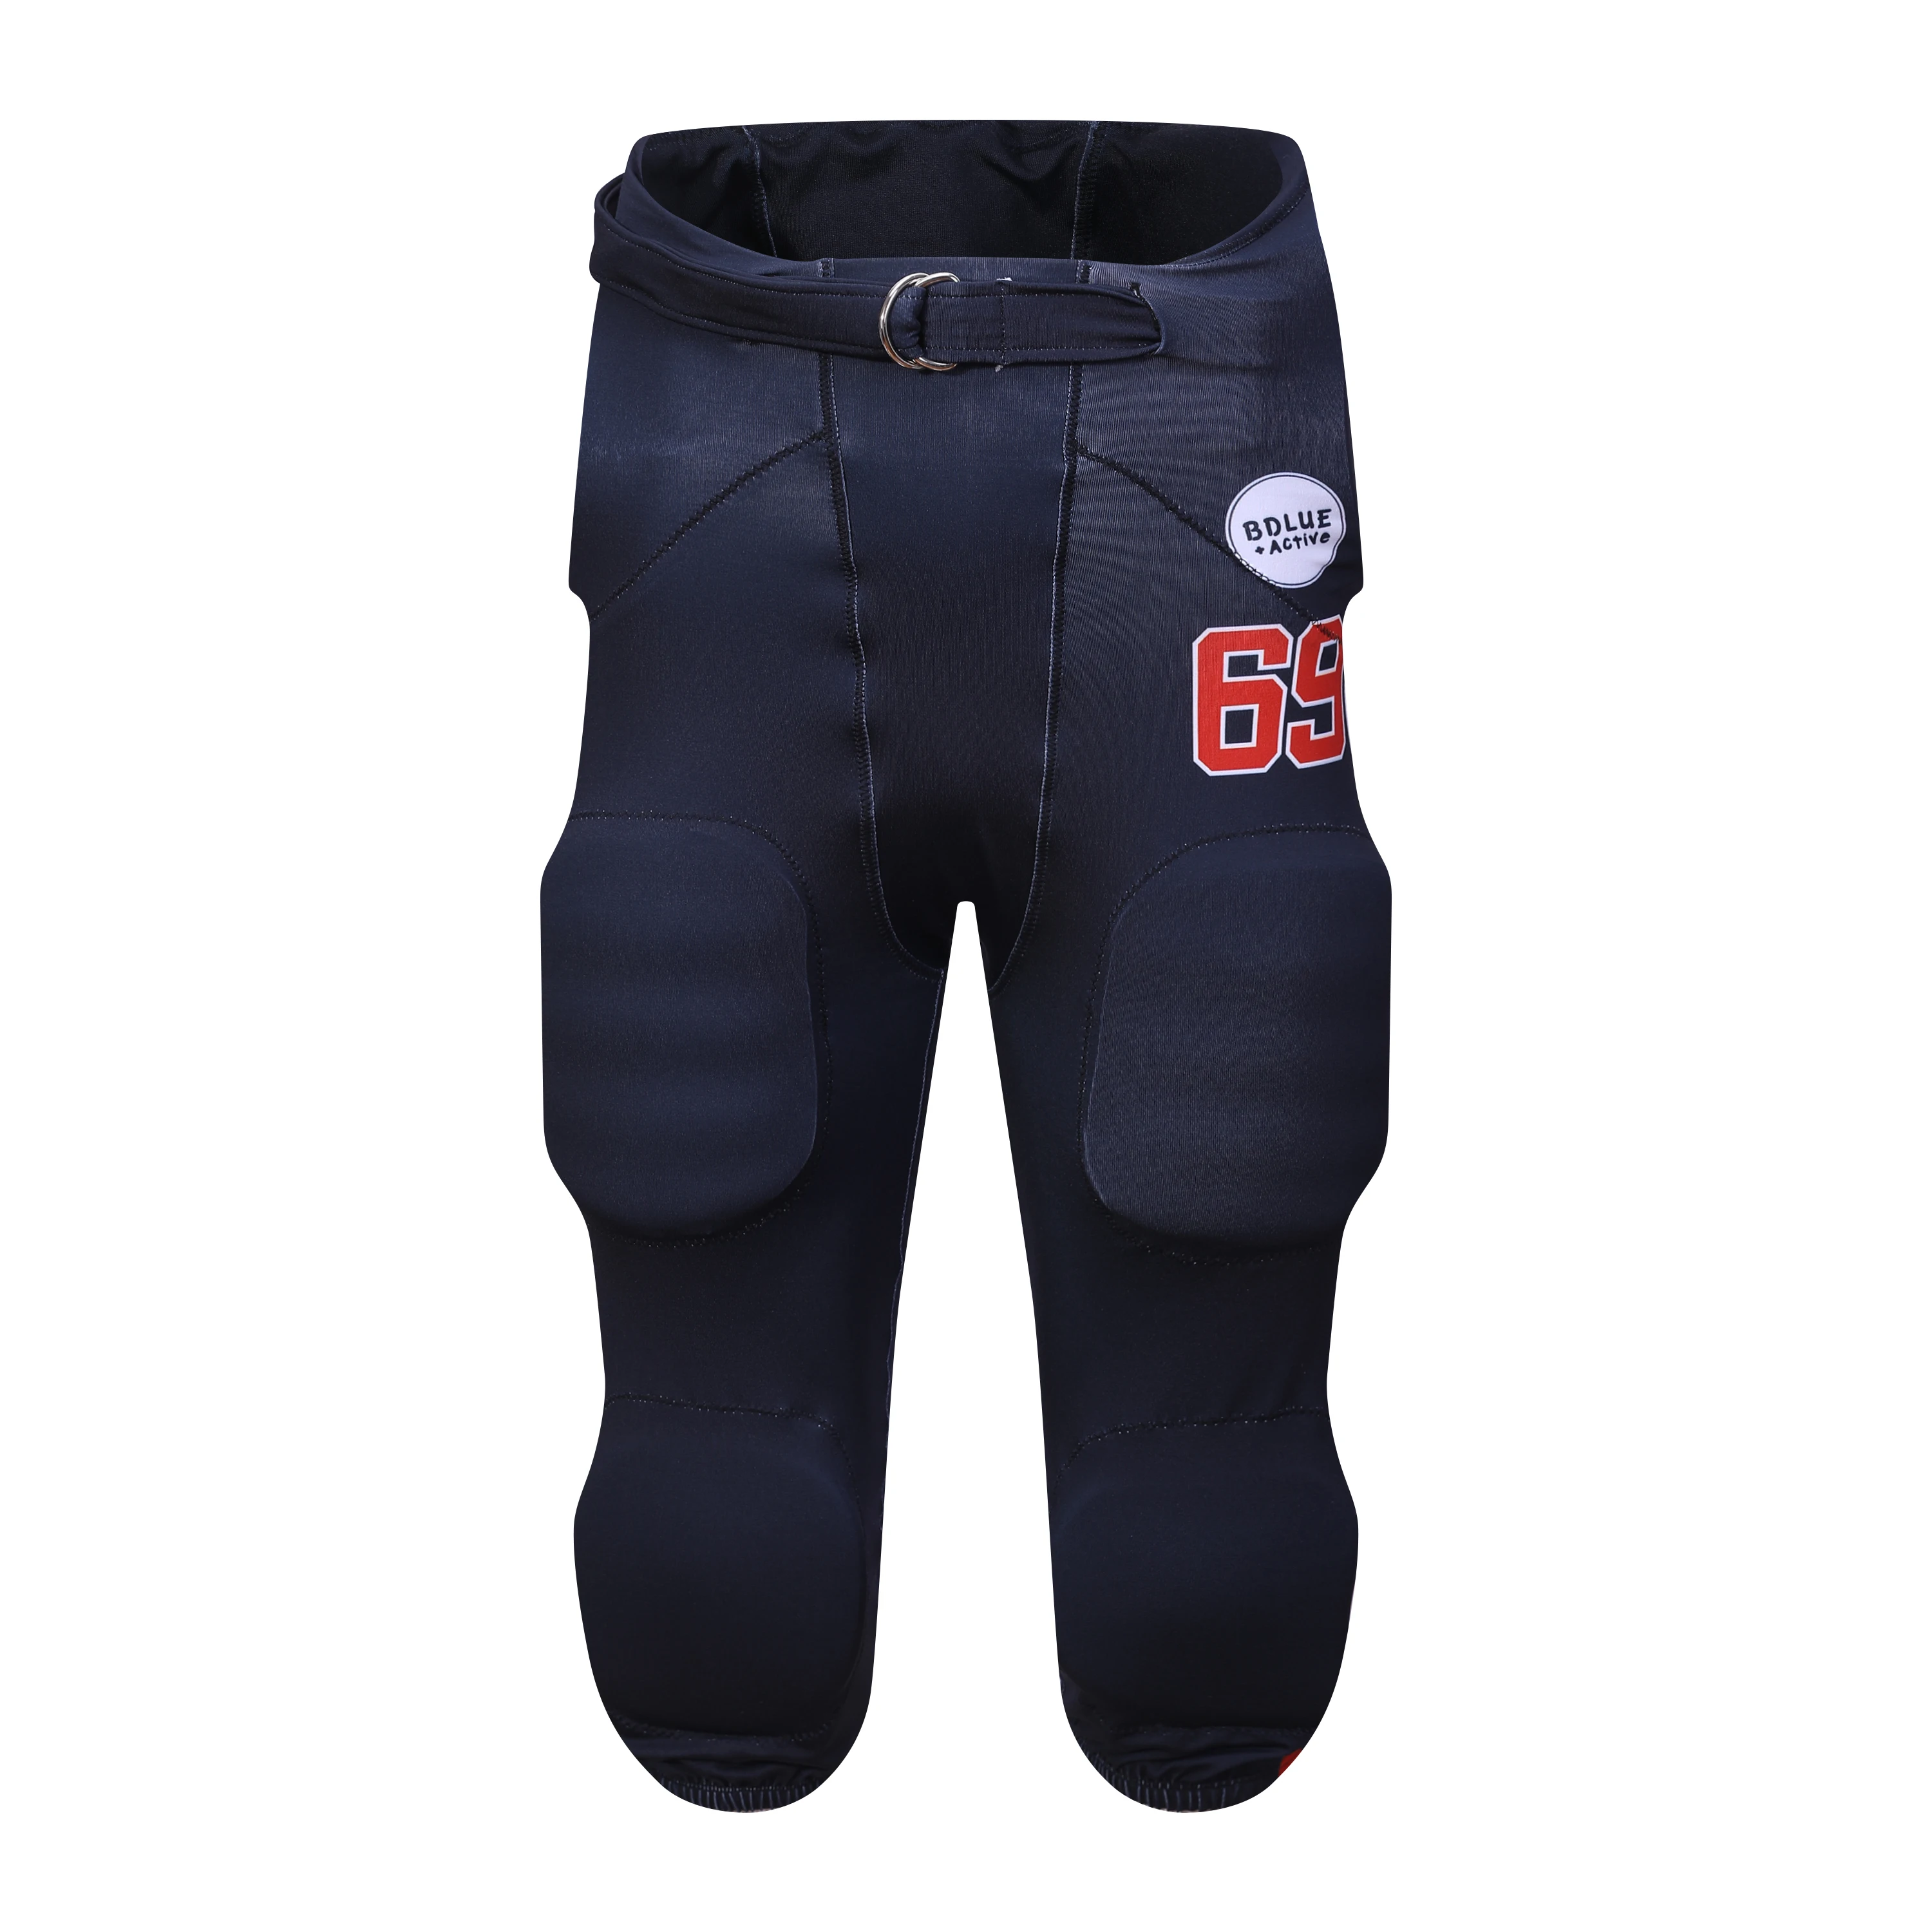 Dblue new football pants Stretch Fit Durable Custom Sublimated Youth American Football Team Wear Pants